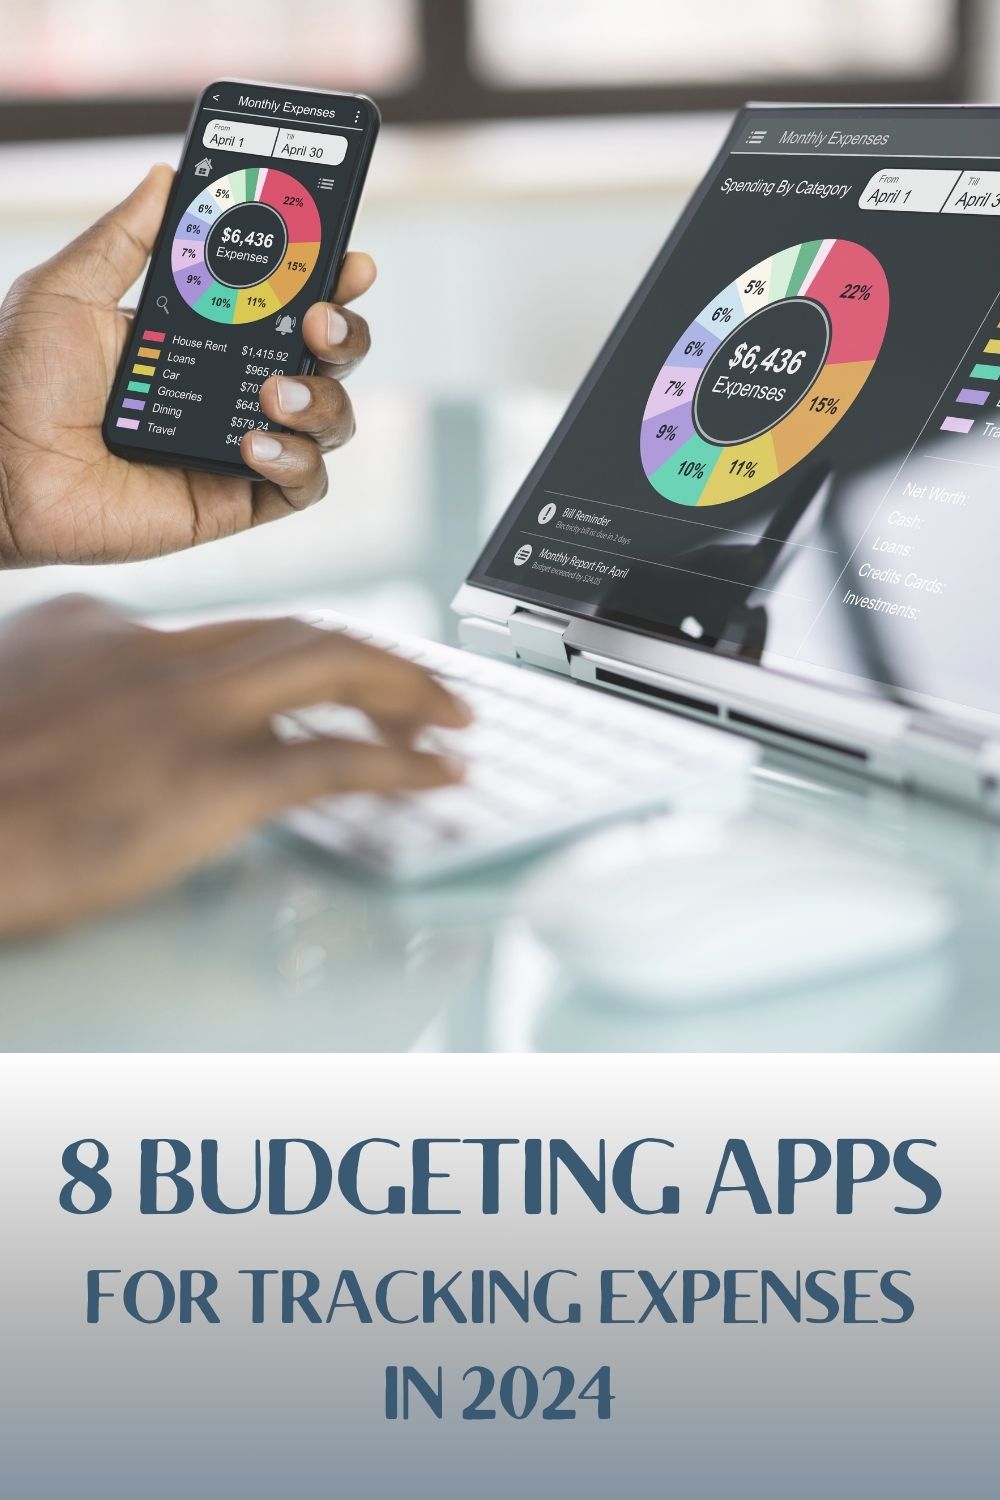 Here’s a list of eight different budgeting apps that will make it easy for you to keep track of your household budget right on your mobile device.